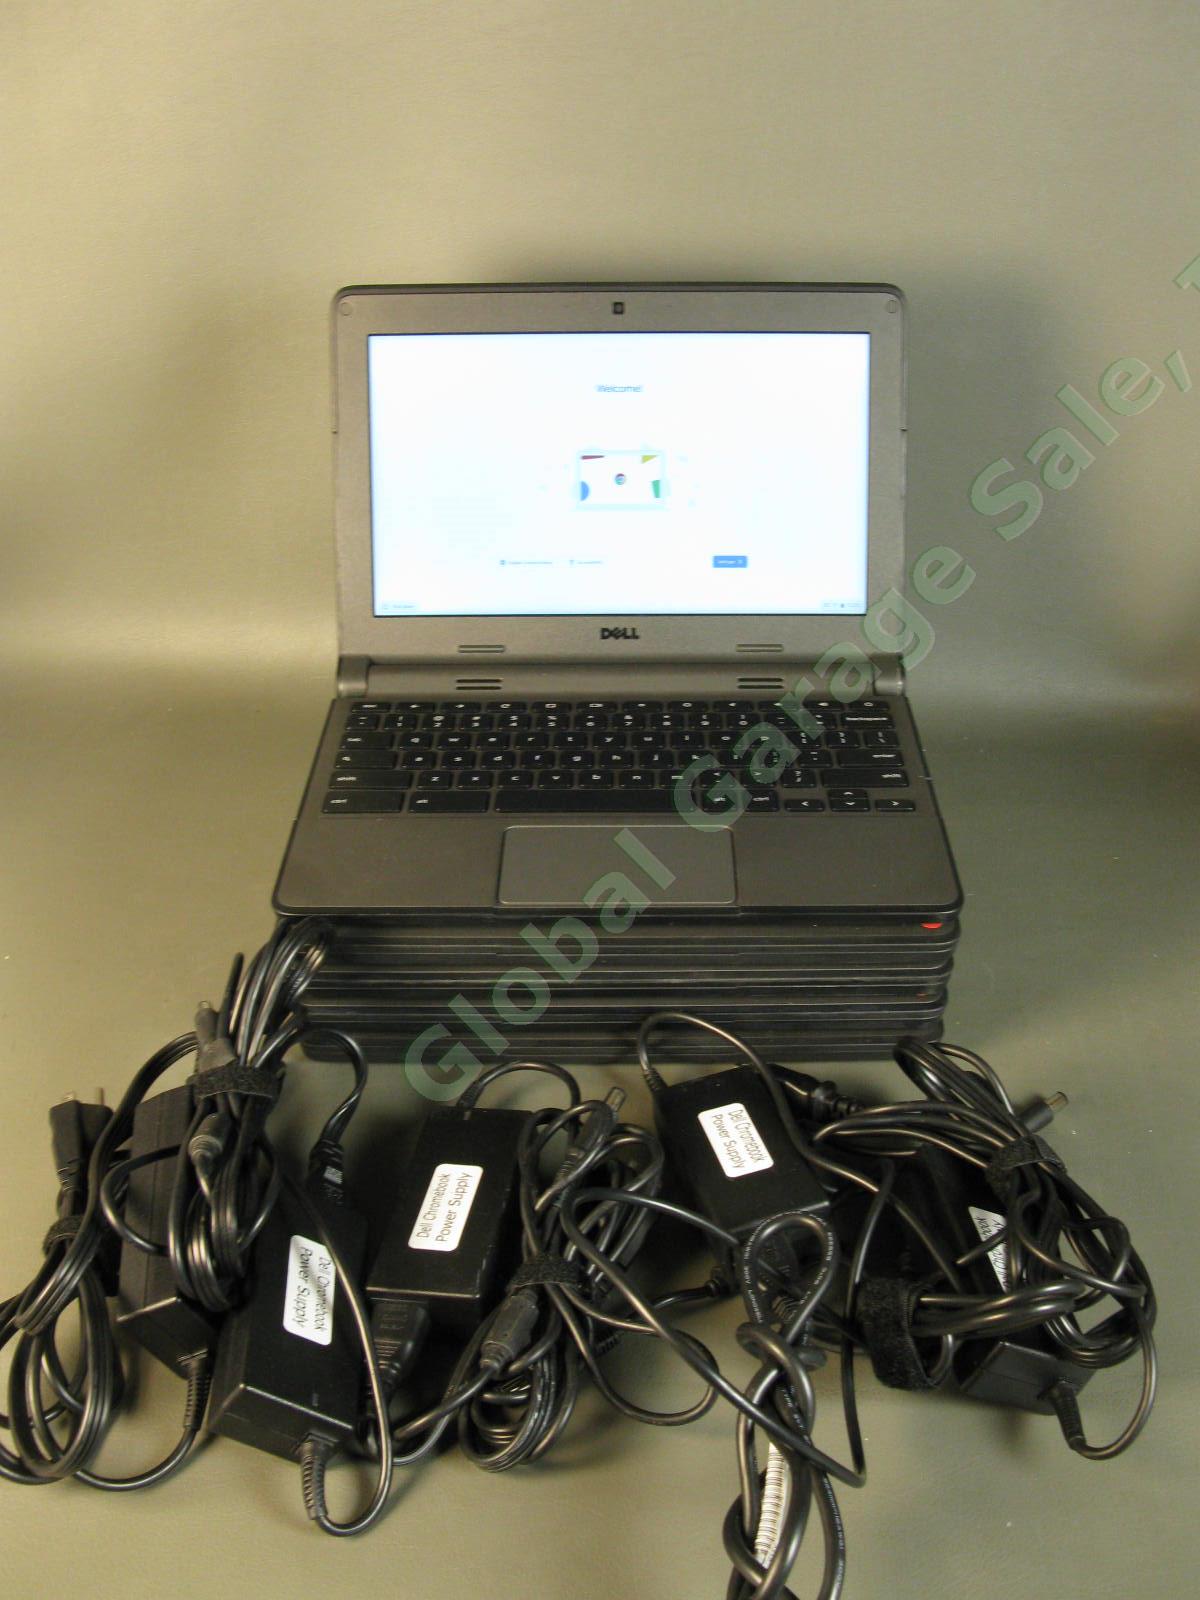 LOT of 10 Dell Chromebook 11 3120 P22T Laptop Computer 16GB SSD 4GB RAM Chargers